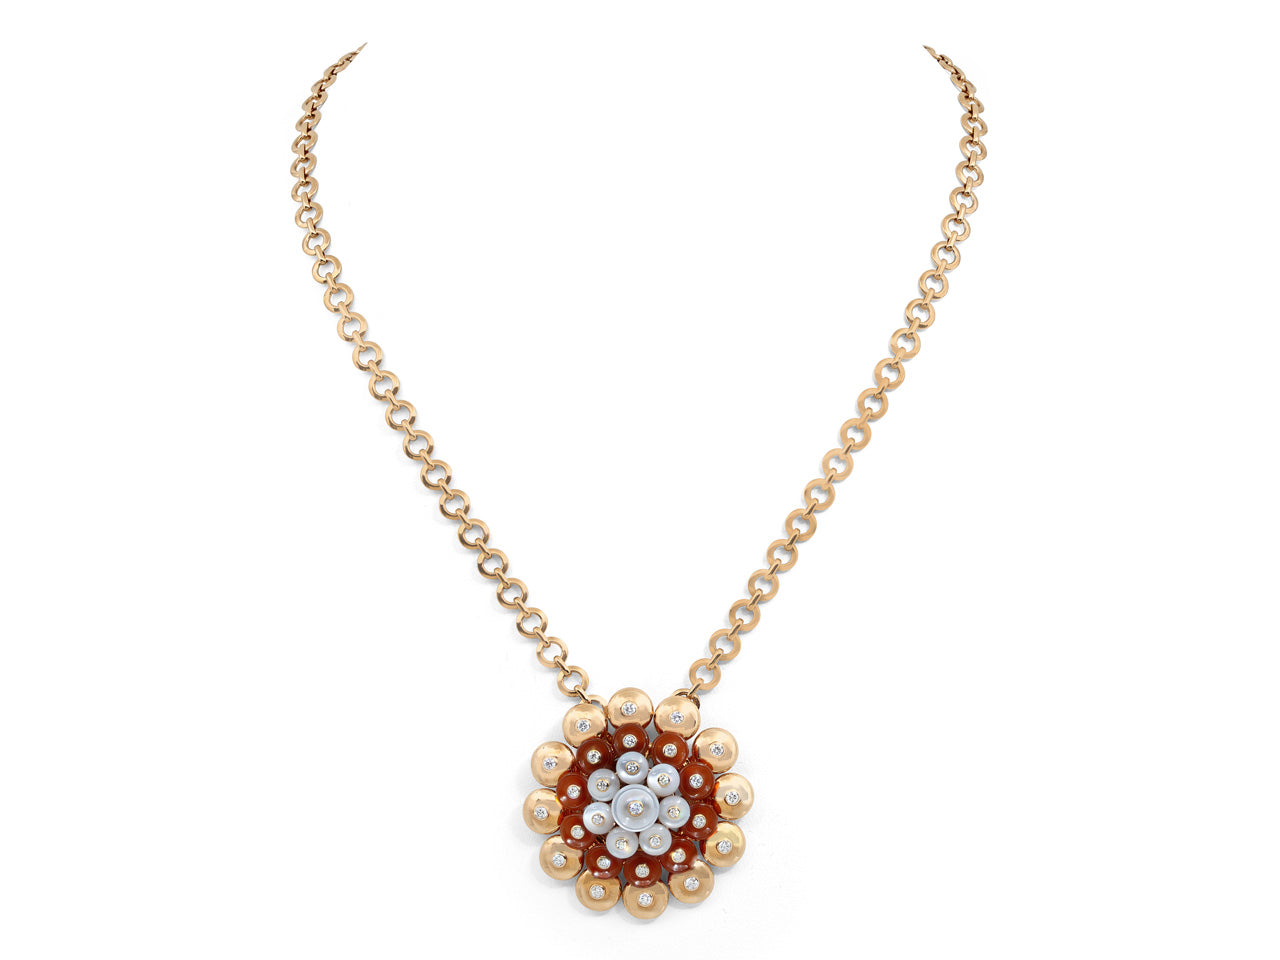 Van Cleef & Arpels 'Bouton d'or' Carnelian, Mother-of-Pearl and Diamond Pendant in 18K Rose Gold